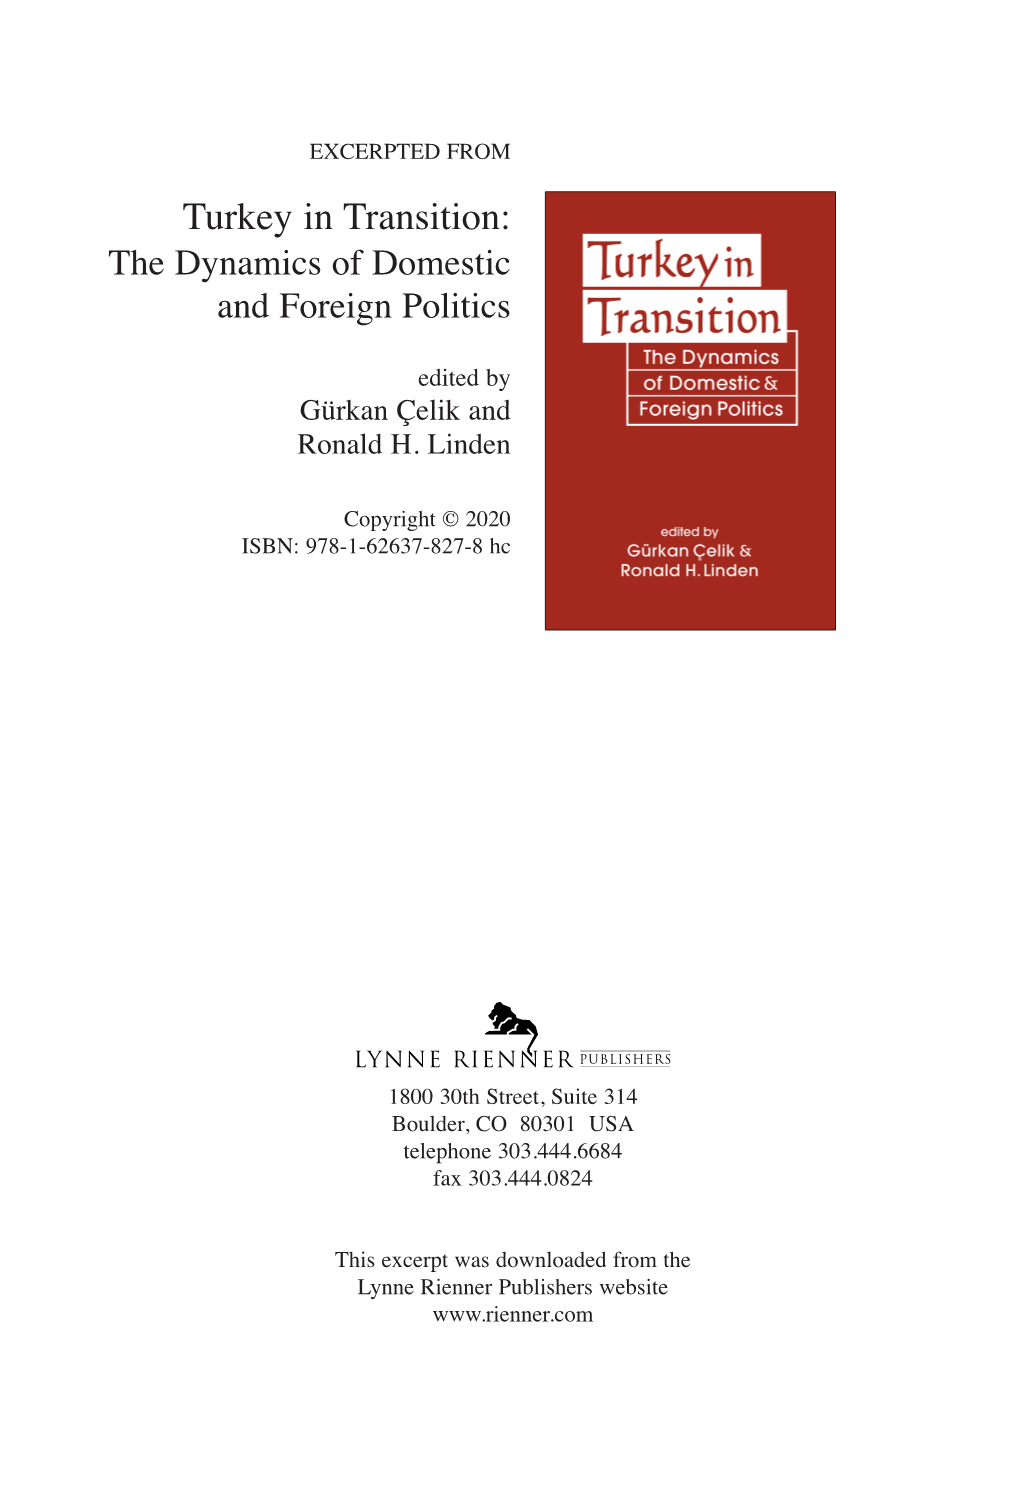 Turkey in Transition: the Dynamics of Domestic and Foreign Politics